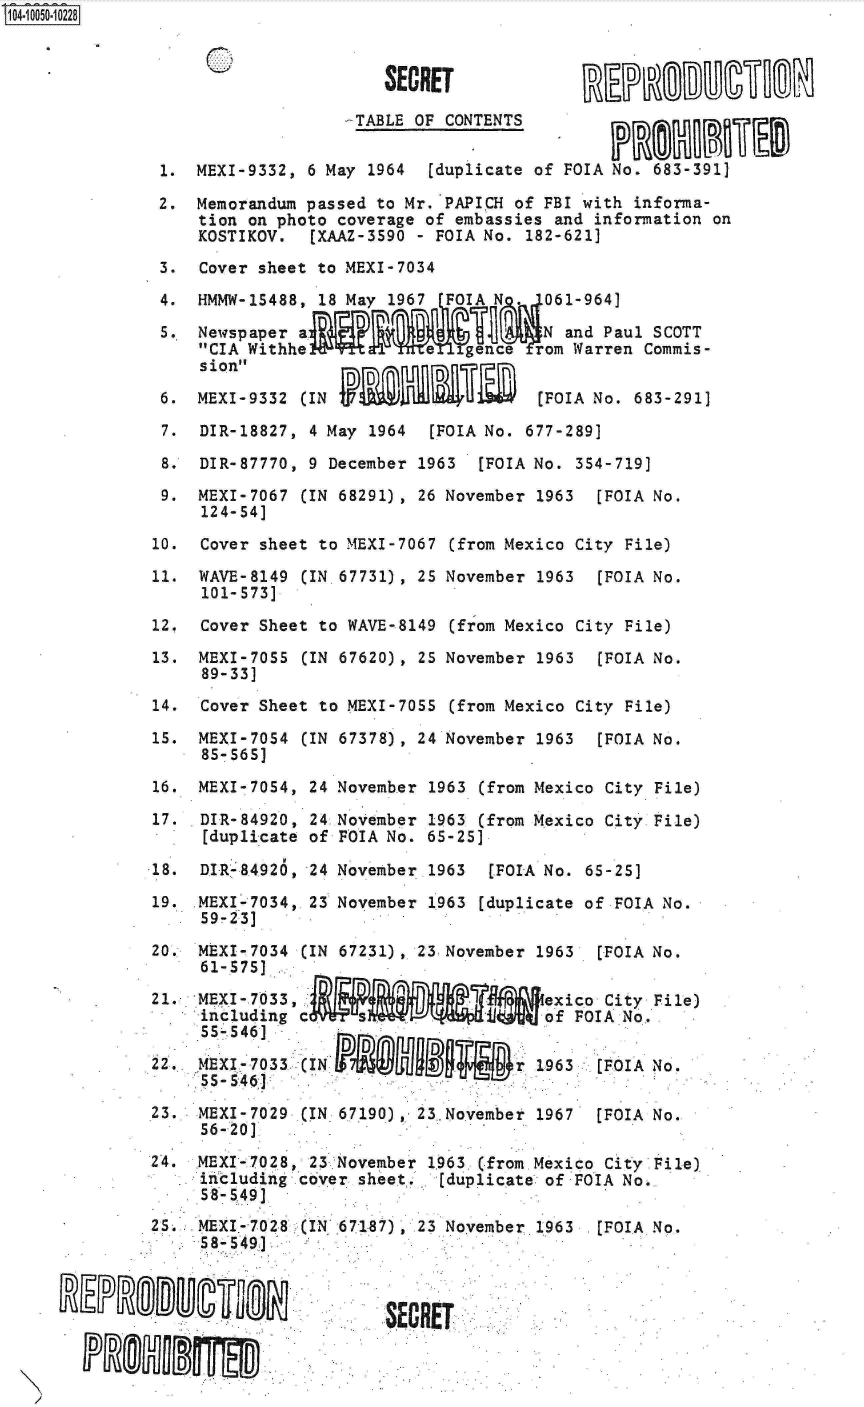 handle is hein.jfk/jfkarch00005 and id is 1 raw text is: 104-10050-10228



                                       SECRET

                                   -TABLE OF CONTENTS


                1. MEXI-9332,  6 May 1964  [duplicate of FOIA No. 683-391]

                2. Memorandum  passed to Mr. PAPICH of FBI with informa-
                    tion on photo coverage of embassies and information on
                    KOSTIKOV.  [XAAZ-3590 - FOIA No. 182-621)

                3.  Cover sheet to MEXI-7034

                4.  HMMW-15488, 18 May 1967  FOIA N    061-964]

                5.  Newspaper a                        N and Paul SCOTT
                    CIA Withhe            e  igence  rom Warren Commis-
                    sion

                6. MEXI-9332  (IN                     [FOIA No. 683-291]

                7.  DIR-18827, 4 May 1964  [FOIA No. 677-289]

                8.  DIR-87770, 9 December 1963  [FOIA No. 354-719]

                9.  MEXI-7067 (IN 68291), 26 November 1963  [FOIA No.
                    124-54]

               10.  Cover sheet to MEXI-7067 (from Mexico City File)

               11.  WAVE-8149 (IN.67731), 25 November 1963   [FOIA No.
                    101-573]

               12.  Cover Sheet to WAVE-8149 (from Mexico City File)

               13.  MEXI-7055 (IN 67620), 25 November 1963   [FOIA No.
                    89-33]

               14.  Cover Sheet to MEXI-7055 (from Mexico City File)

               15.  MEXI-7054 (IN 67378), 24 November 1963   [FOIA No.
                    85-565]

               16.  MEXI-7054, 24 November 1963 (from Mexico City File)

               17.  DIR-84920, 24 November 1963 (from Mexico City File)
                    [duplicate of FOIA No. 65-25]
               18.  DIR-84920, 24 November 1963  [FOIA No. 65-25]

               19.  MEXI-7034, 23 November 1963 [duplicate of FOIA No.
                    59-23]

               20.  MEXI-7034 (IN 67231), 23 November 1963  [FOIA No.
                    61-575]
               21.  MEXI-7033,                         exico City File)
                    including c                        of POIA No
                    55-546]

               22.  MEXI-7033 (IN                     1963  [F0IA No.
                    55- 546]

               23.  MEXI-7029 (IN 67190)  23. November 1967 [FOIA No.
                    56-20]

               24.  MEXI-7028, 23 November 1963 (from Mexico City File)
                    including cover sheet,, [duplicate of FOIA No,
                    58-549]
               25.  MEXI-7028 (IN 67187)  23 November 1963  [FOIA No.
                    58- 549]



                                       SECRET


